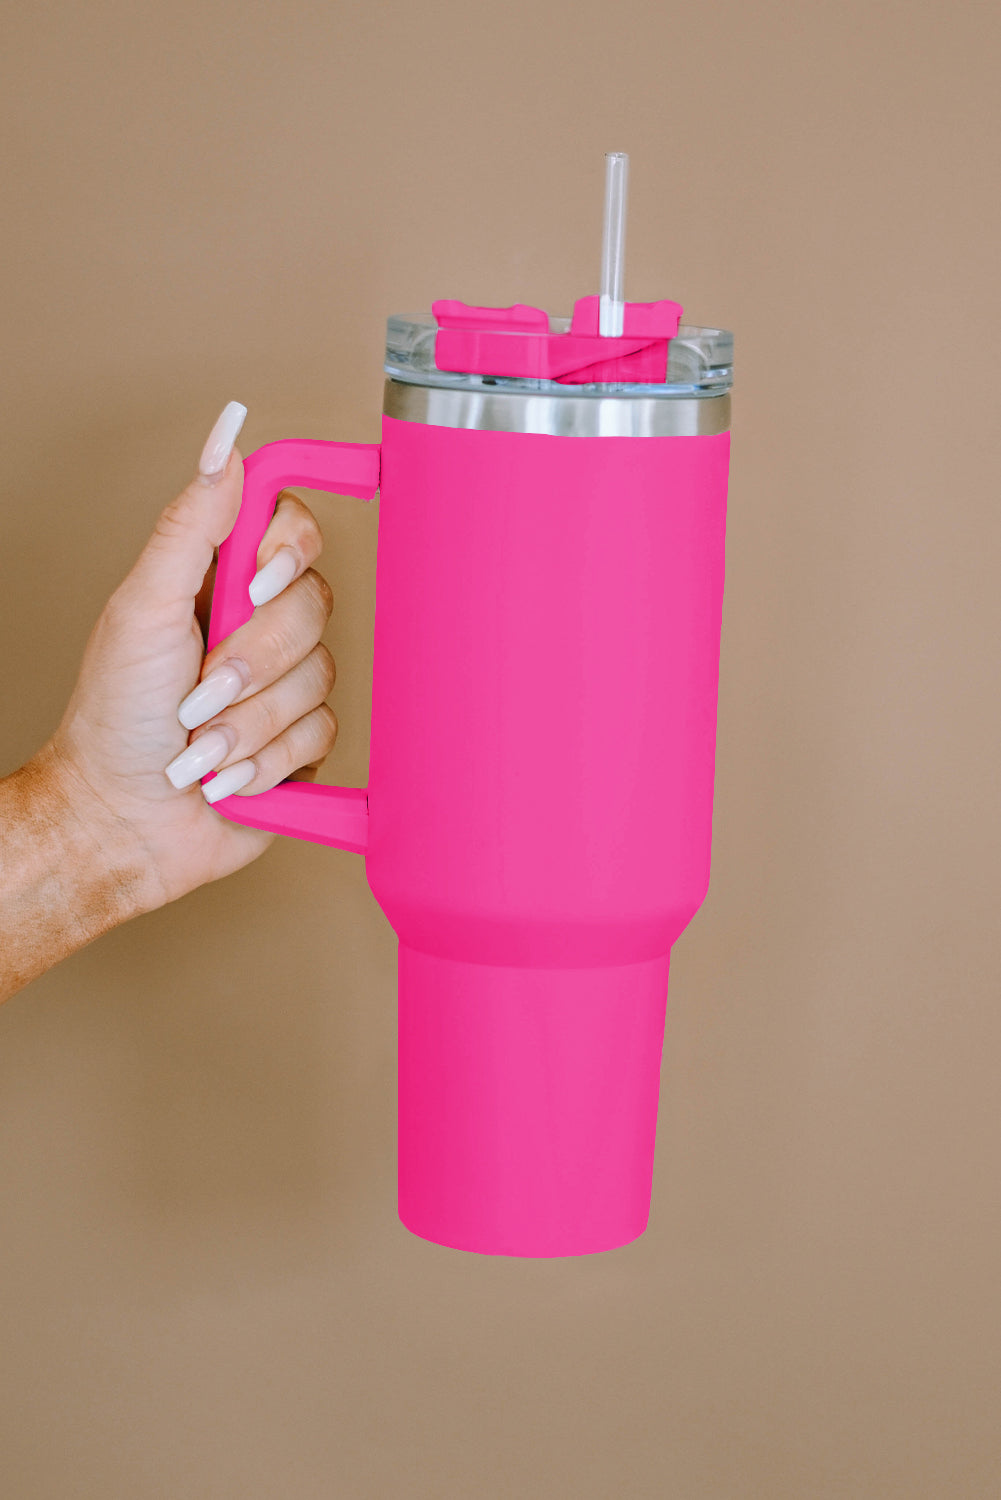 Rose 304 Stainless Steel Double Insulated Cup